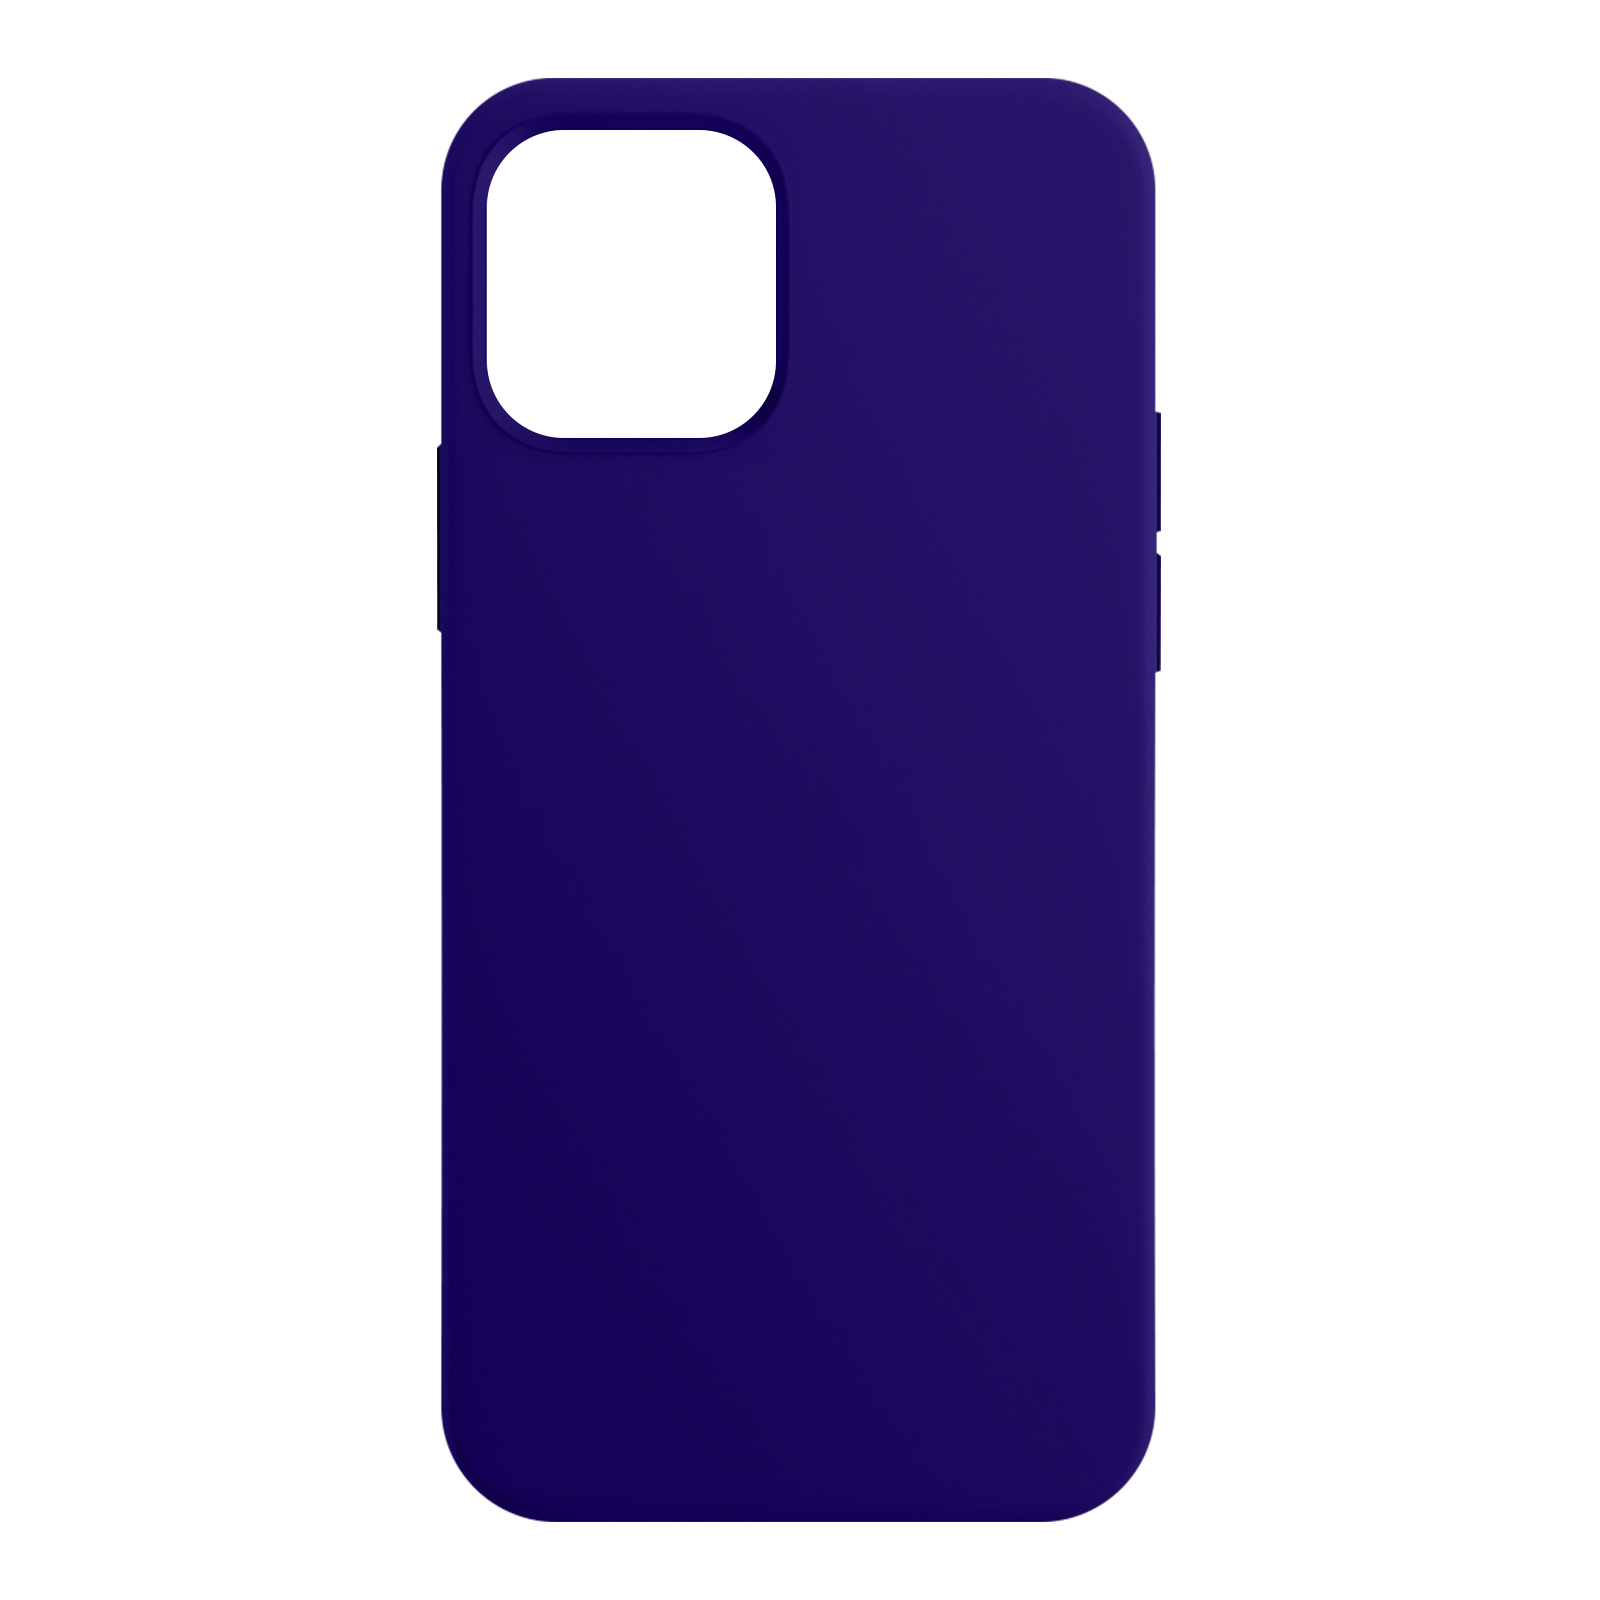 Violett Series, 14, Backcover, iPhone Apple, BeFluo MOXIE